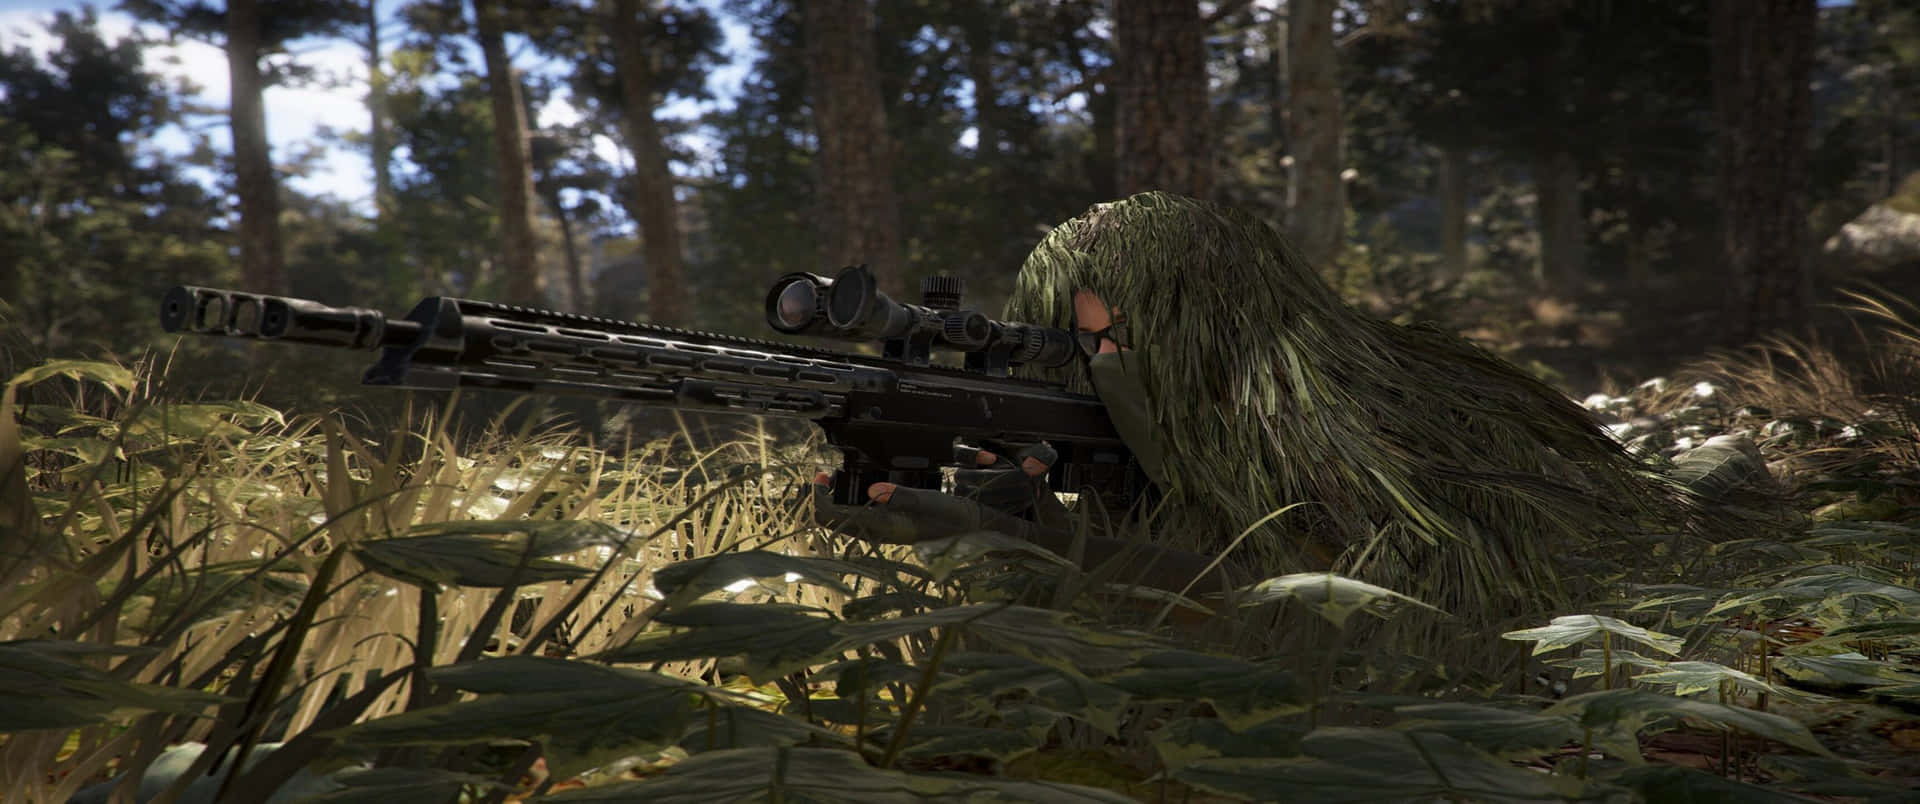 A Man In Camouflage Is Shooting A Rifle In The Woods